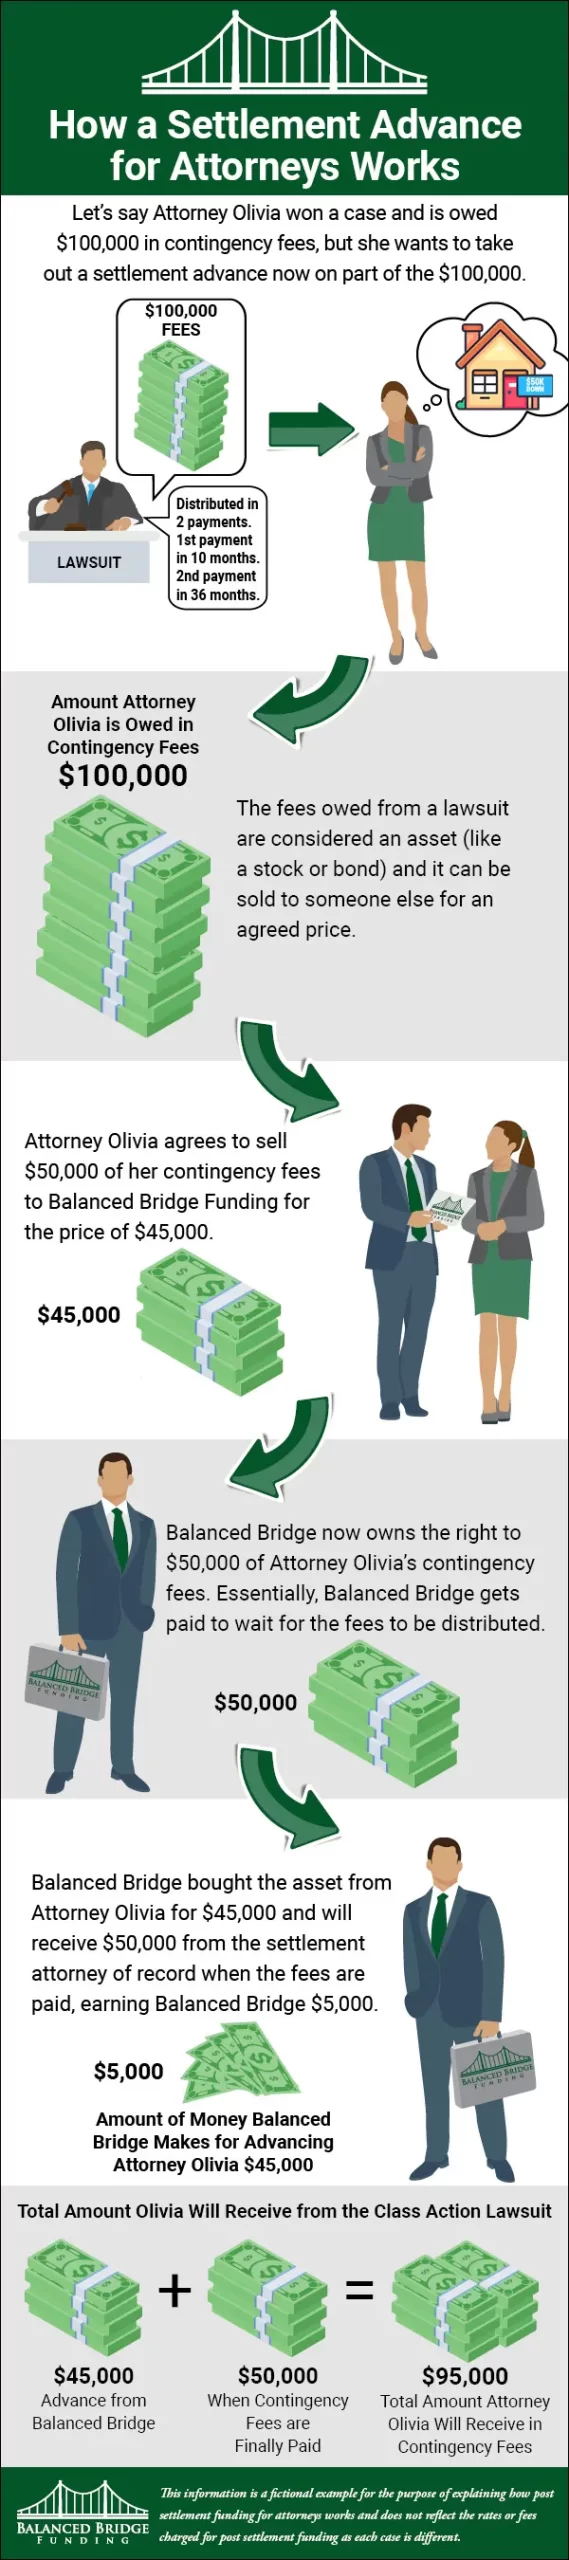 How Settlement Advance for Attorneys Works